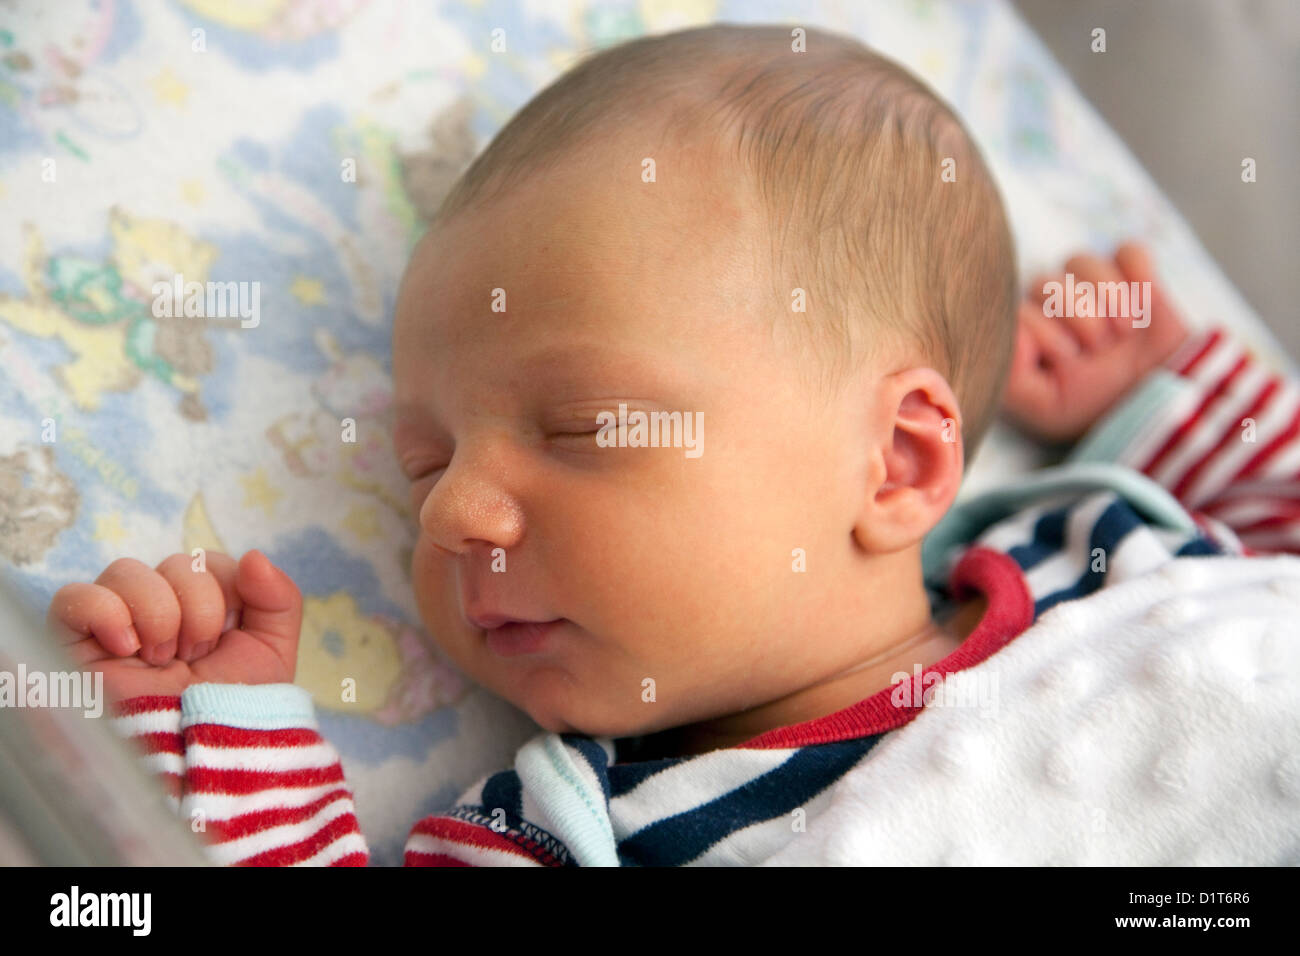 A five day old baby in a hospital cot Stock Photo